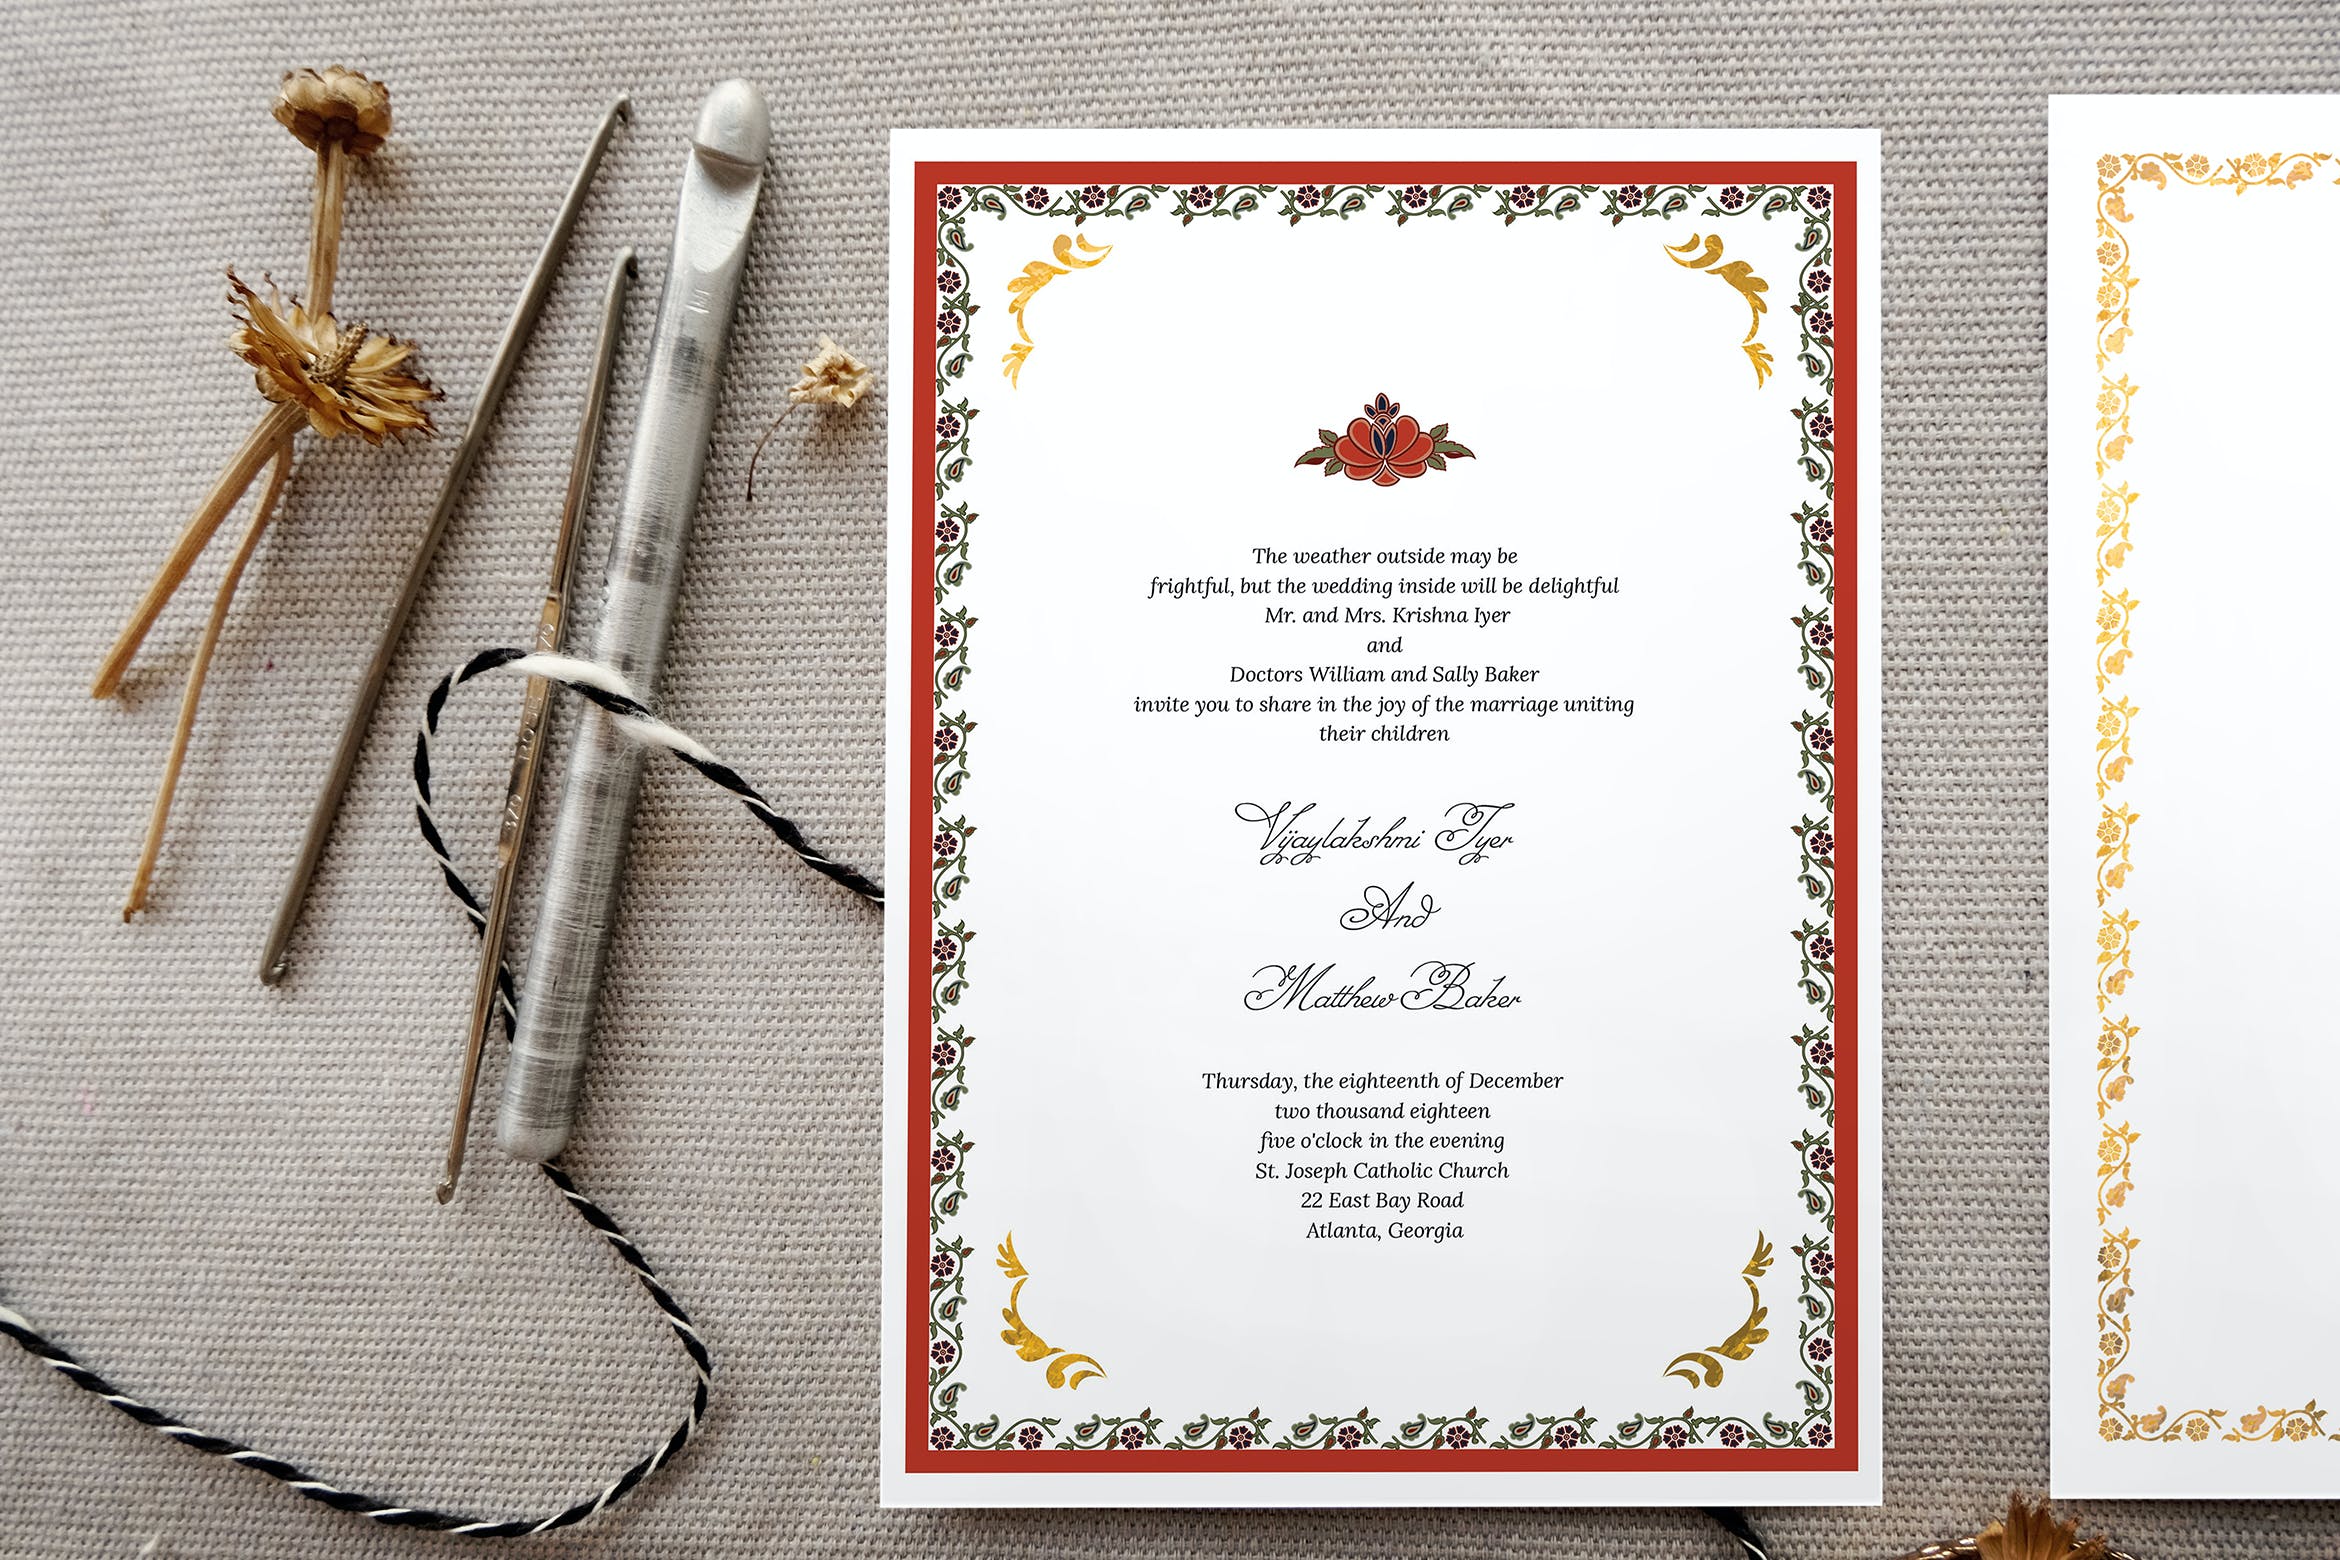 The Latest Trending Scroll Wedding Cards with Impressive Designs